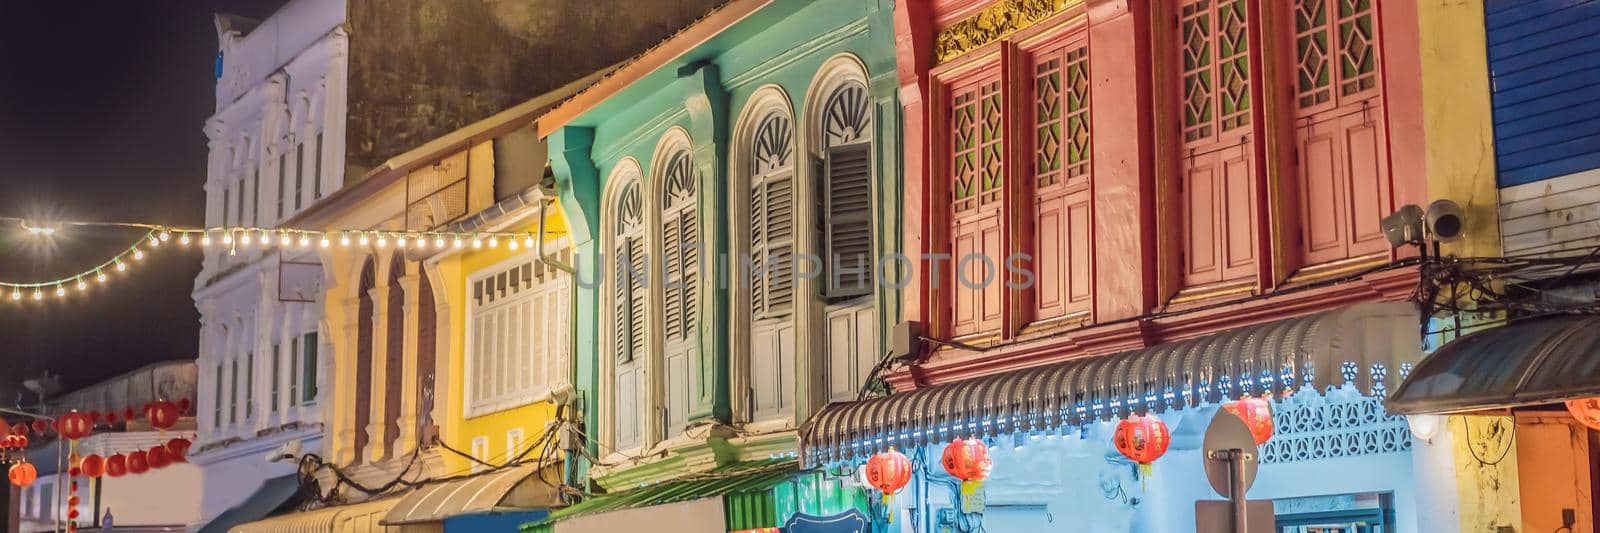 Street in the Portugese style Romani in Phuket Town. Also called Chinatown or the old town BANNER, LONG FORMAT by galitskaya